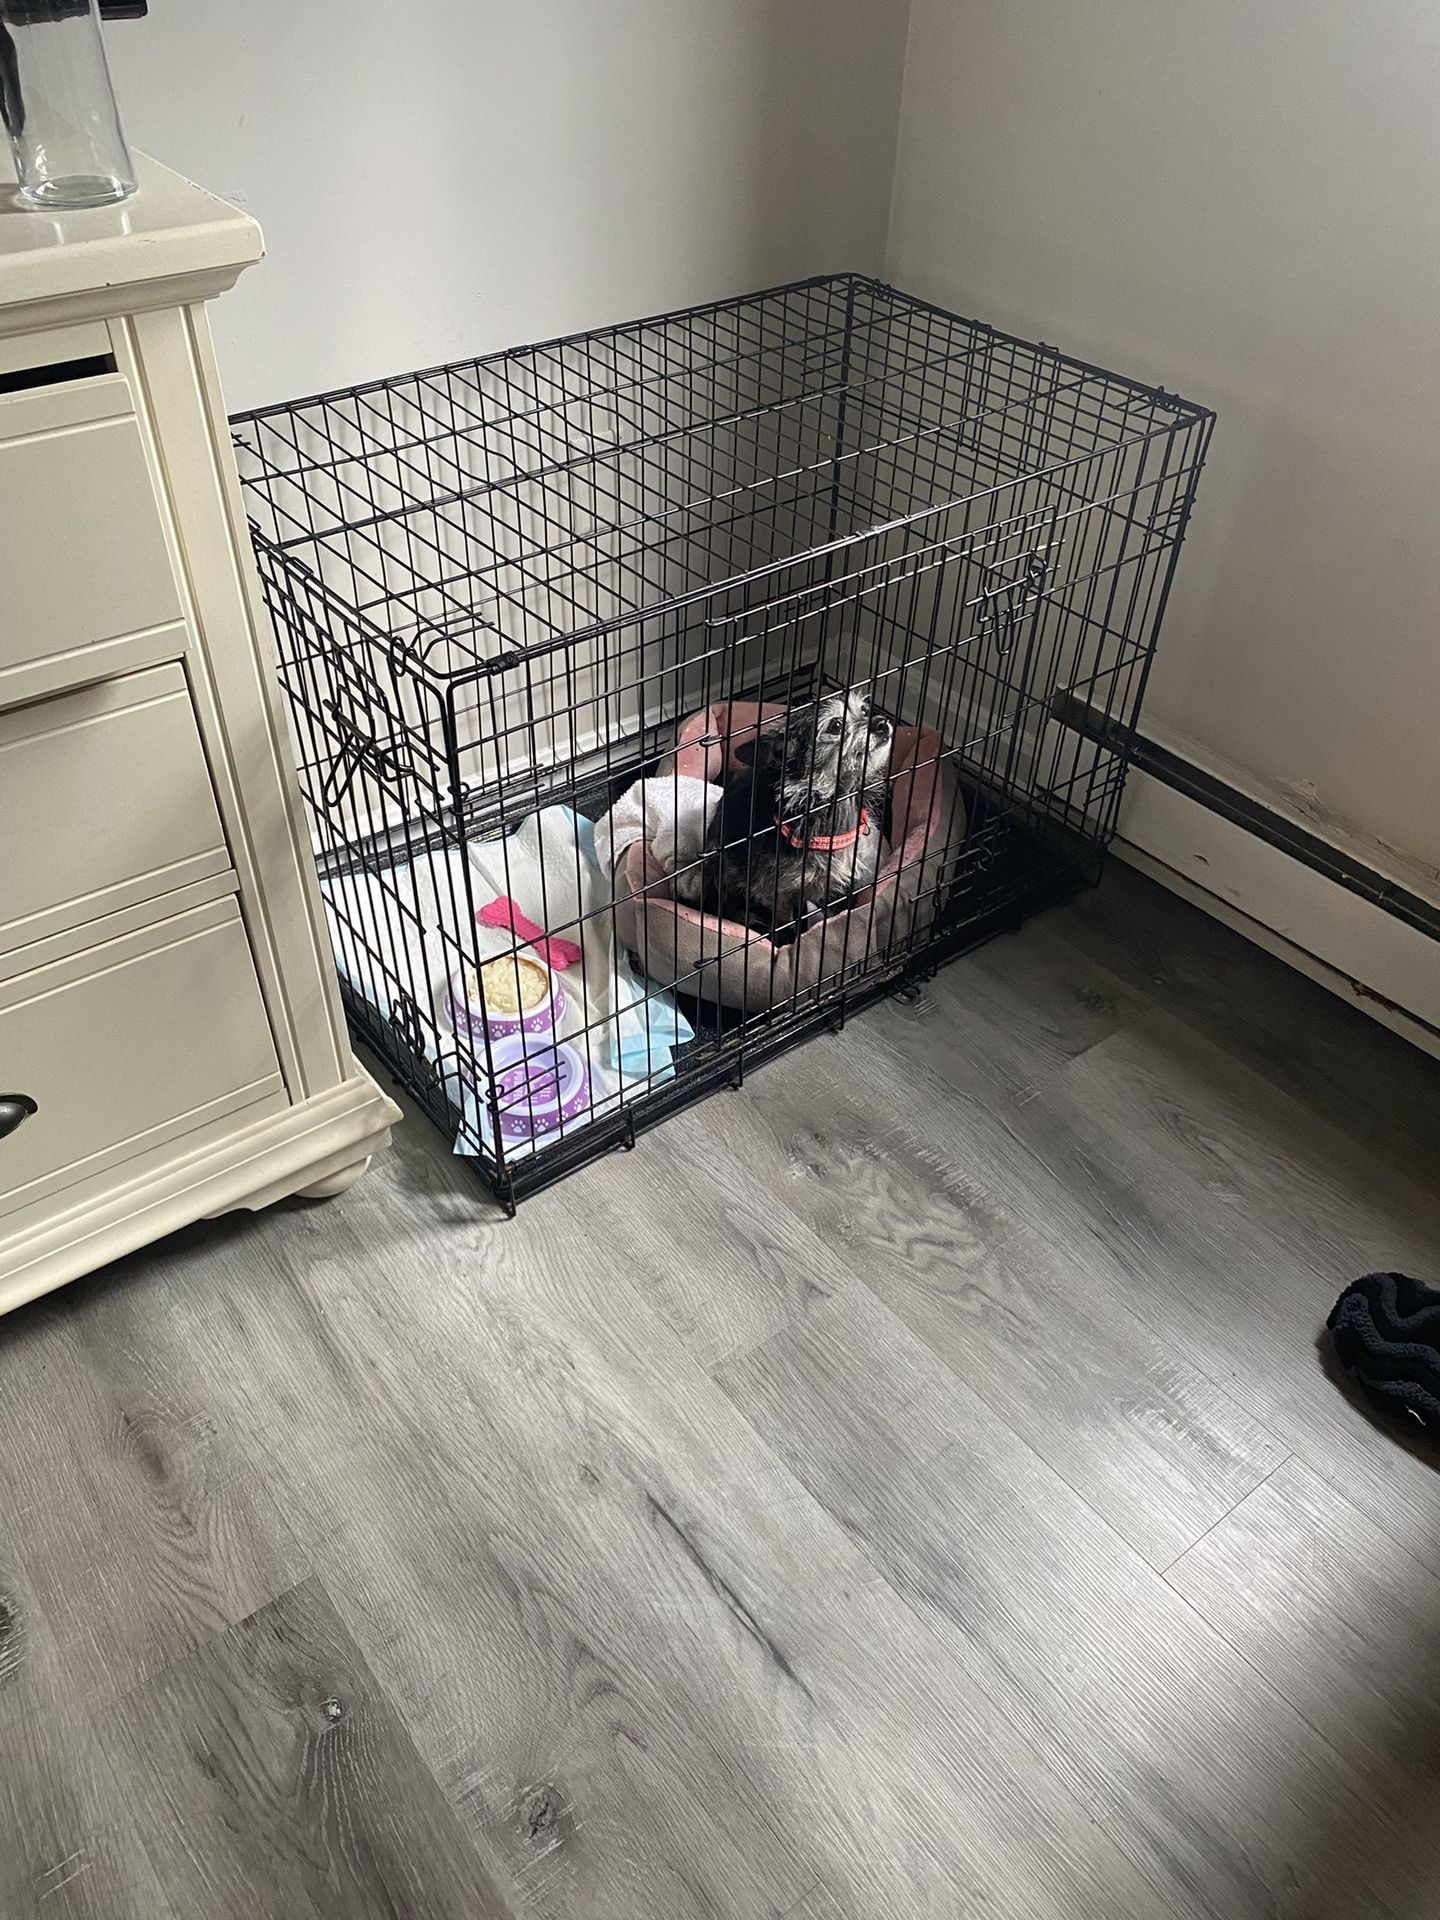 Big Dog Cage For Sale 